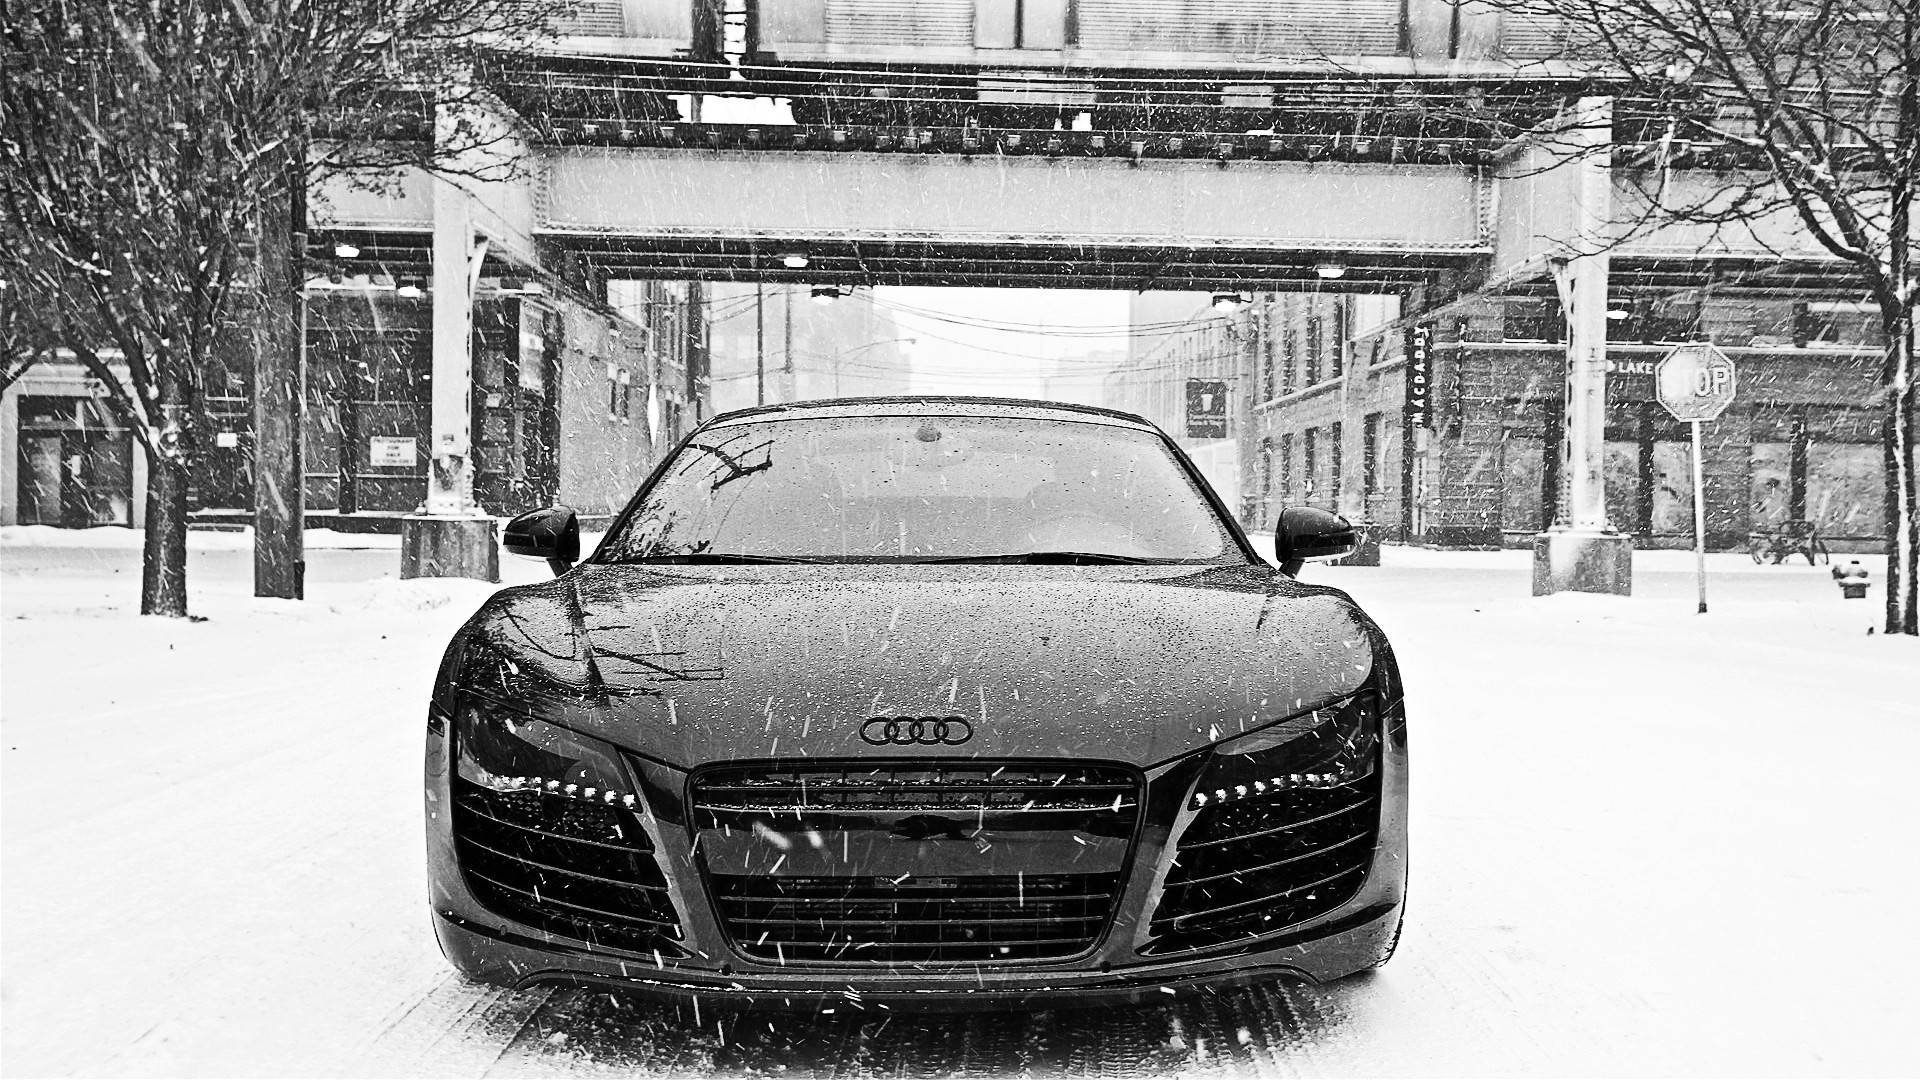 Black and White Audi in Snow HD Wallpaper in Full HD from the Cars category. Tags Audi Black and White, front view, snow, Winter